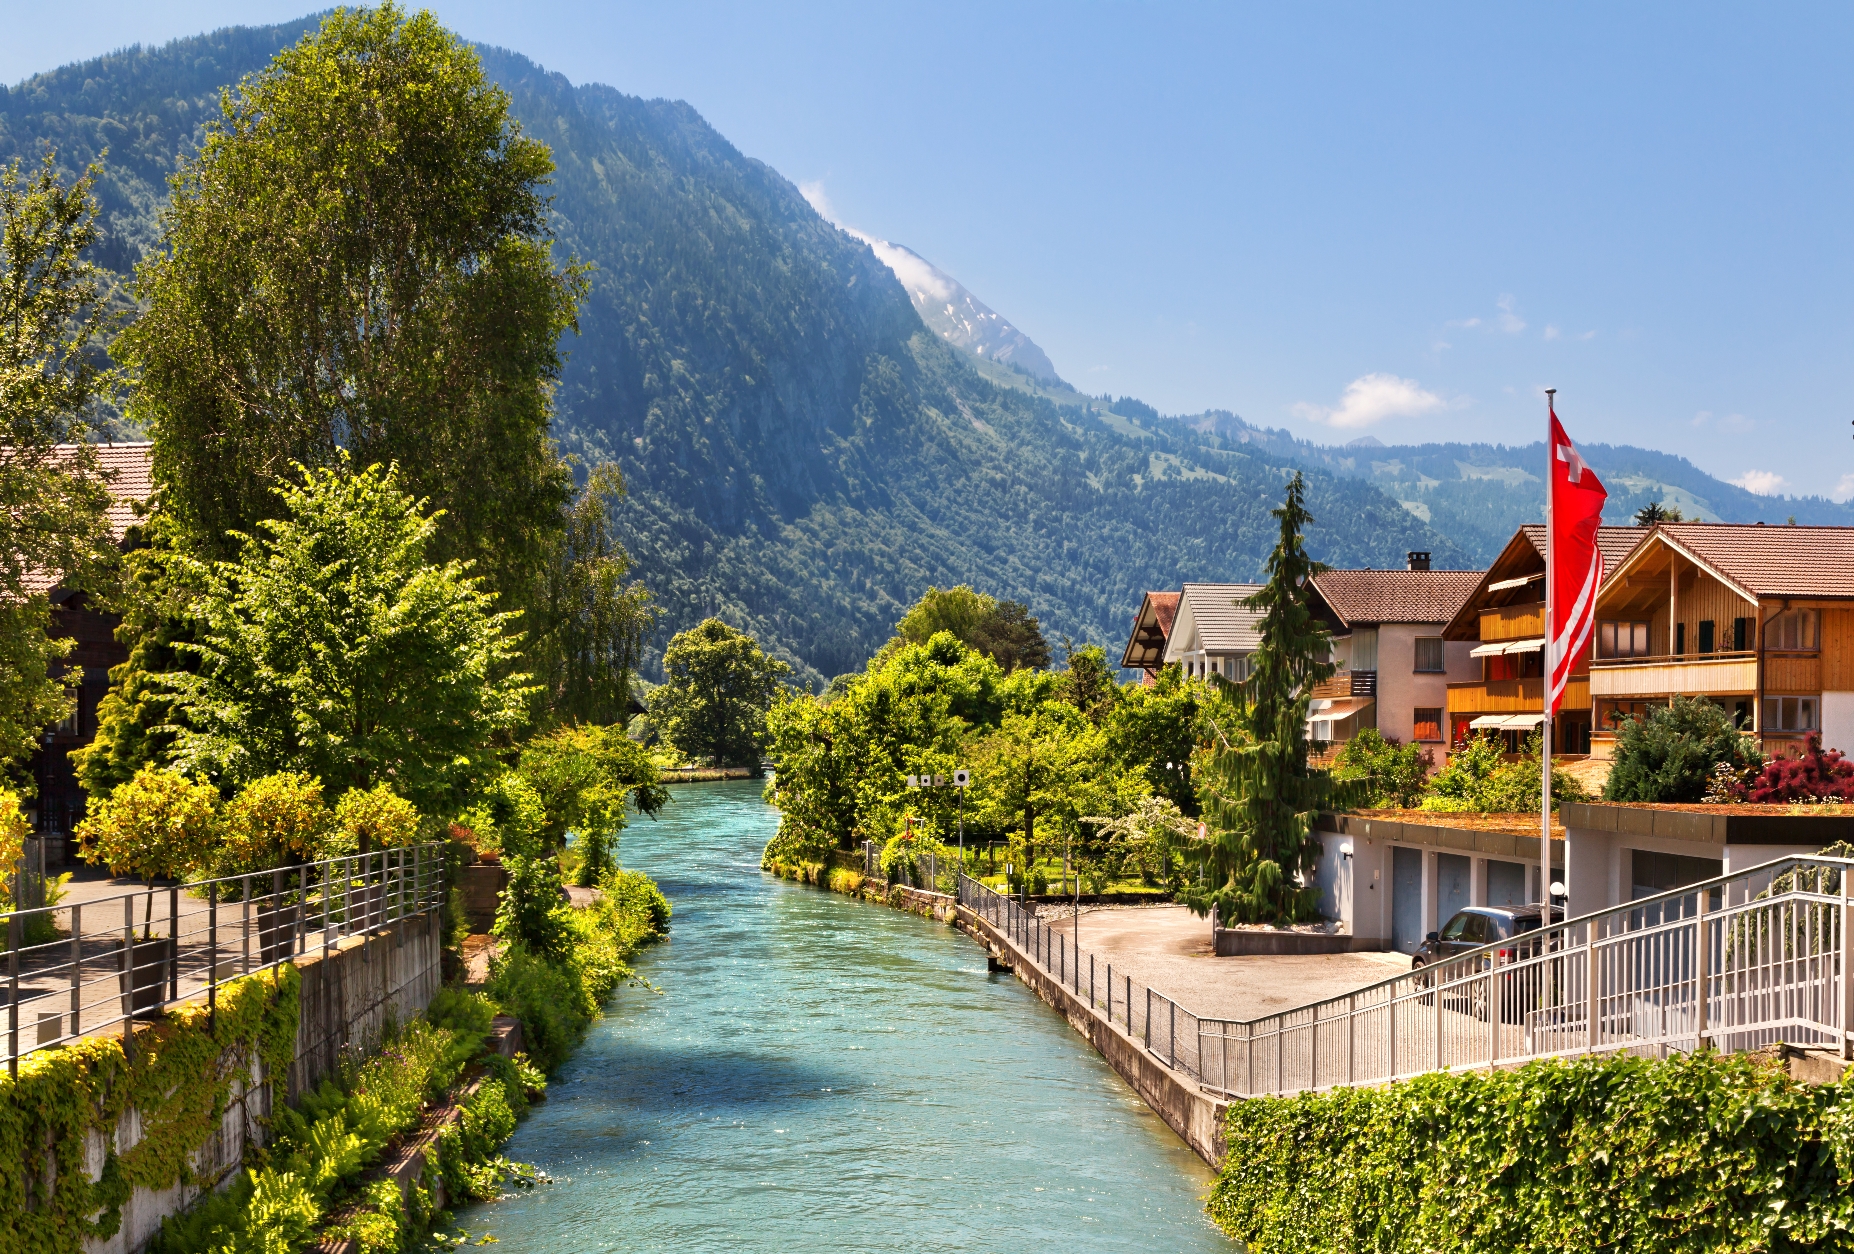 Why should you go to Interlaken in Switzerland? 7 Days Abroad